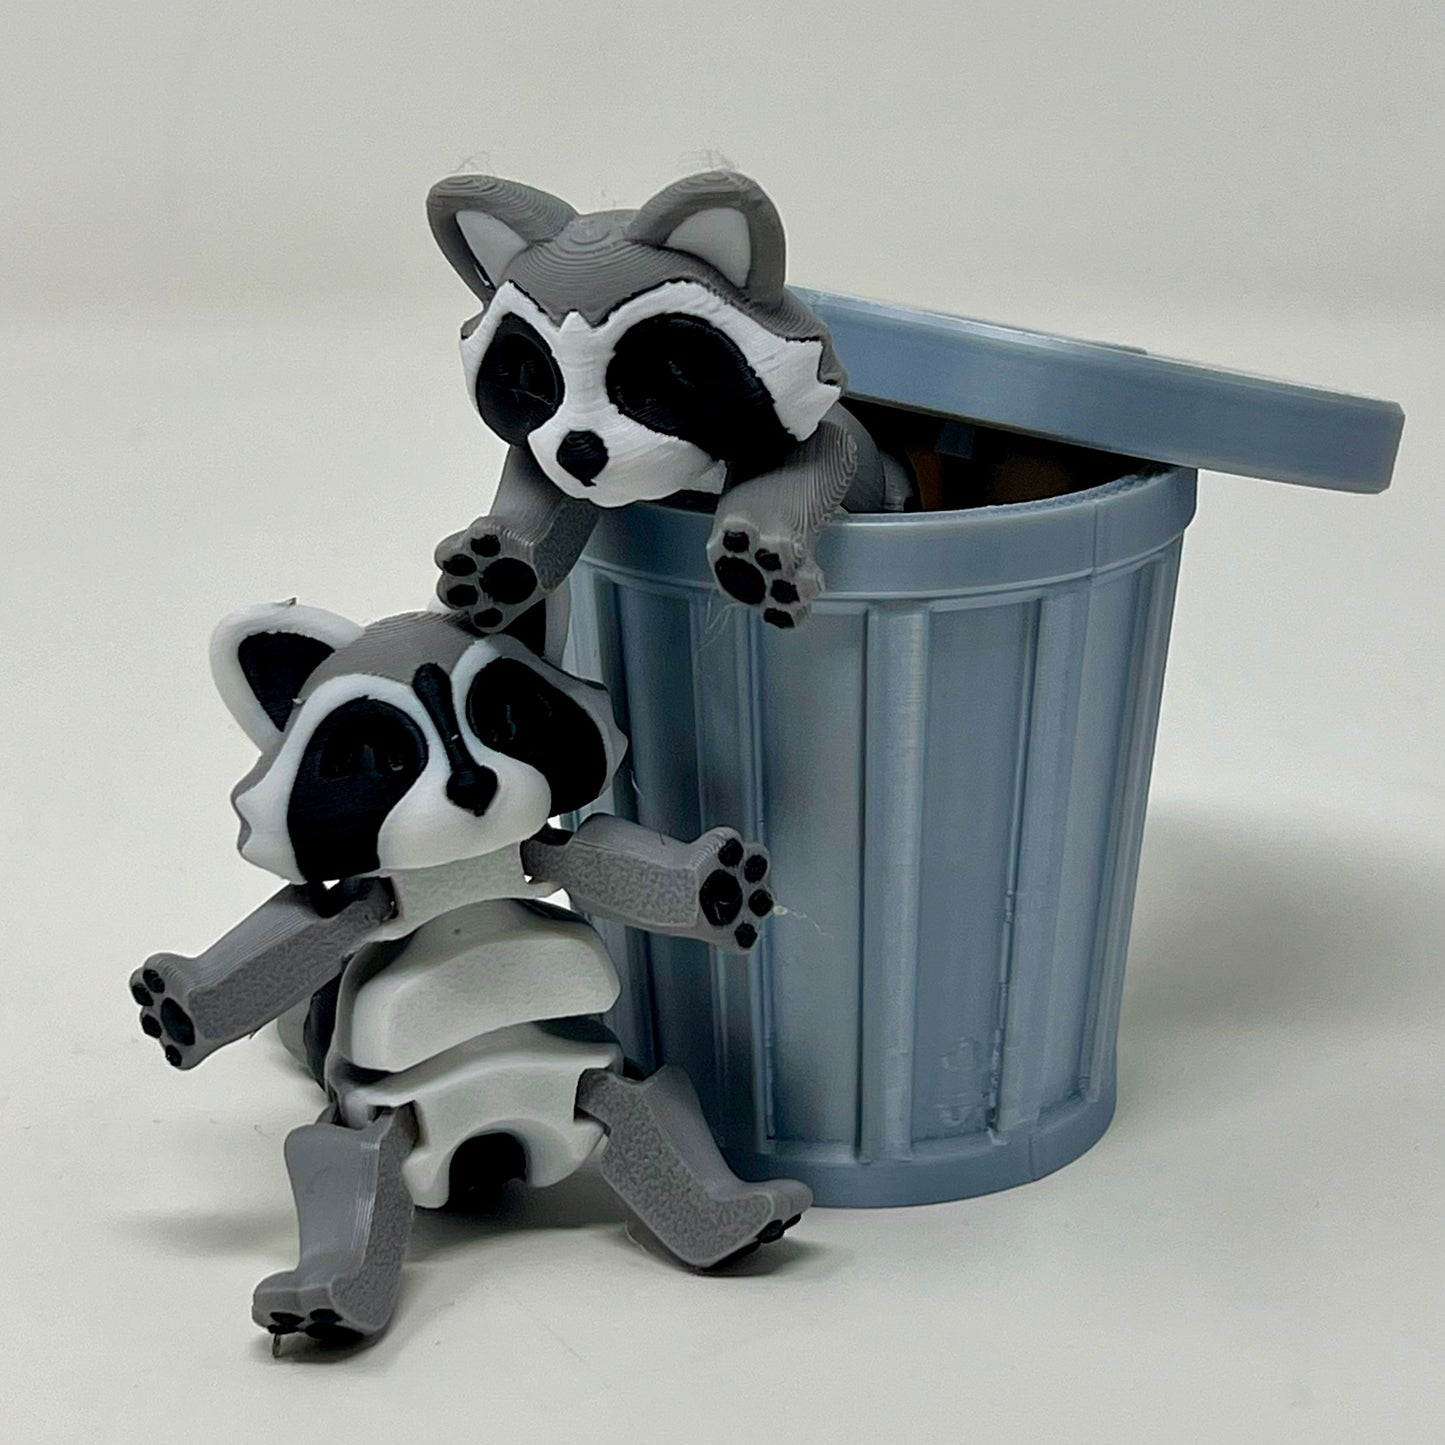 3D Printed Articulated Trash Panda with Garbage Can